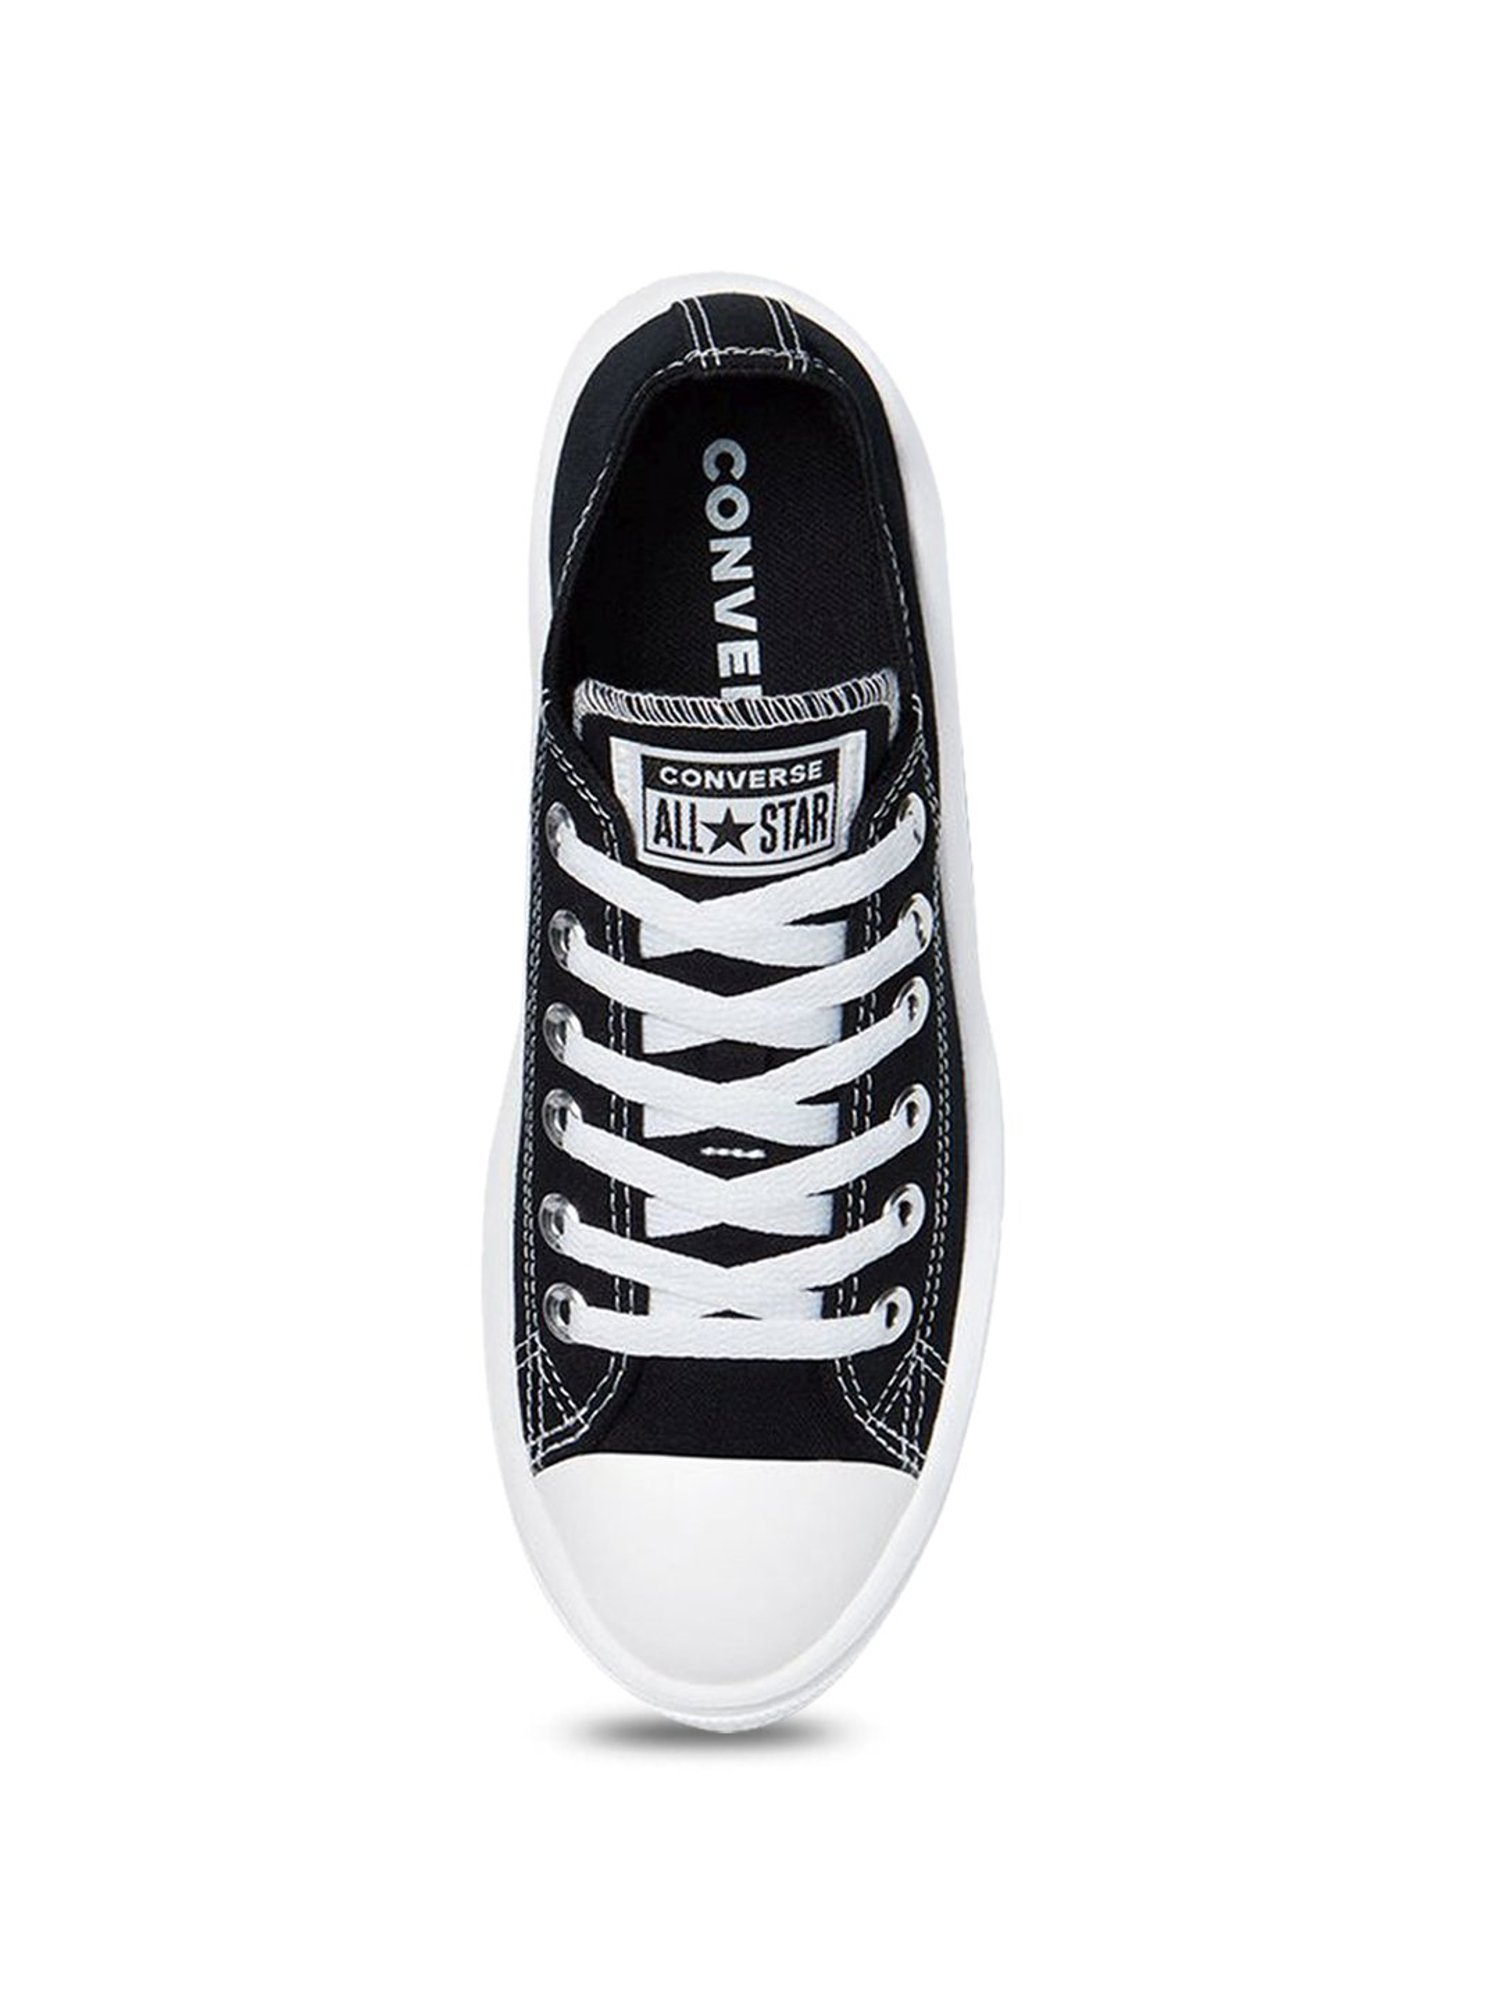 forhandler Reparation mulig Hula hop Buy Converse Women's Chuck Taylor All Star Black Casual Sneakers for Women  at Best Price @ Tata CLiQ